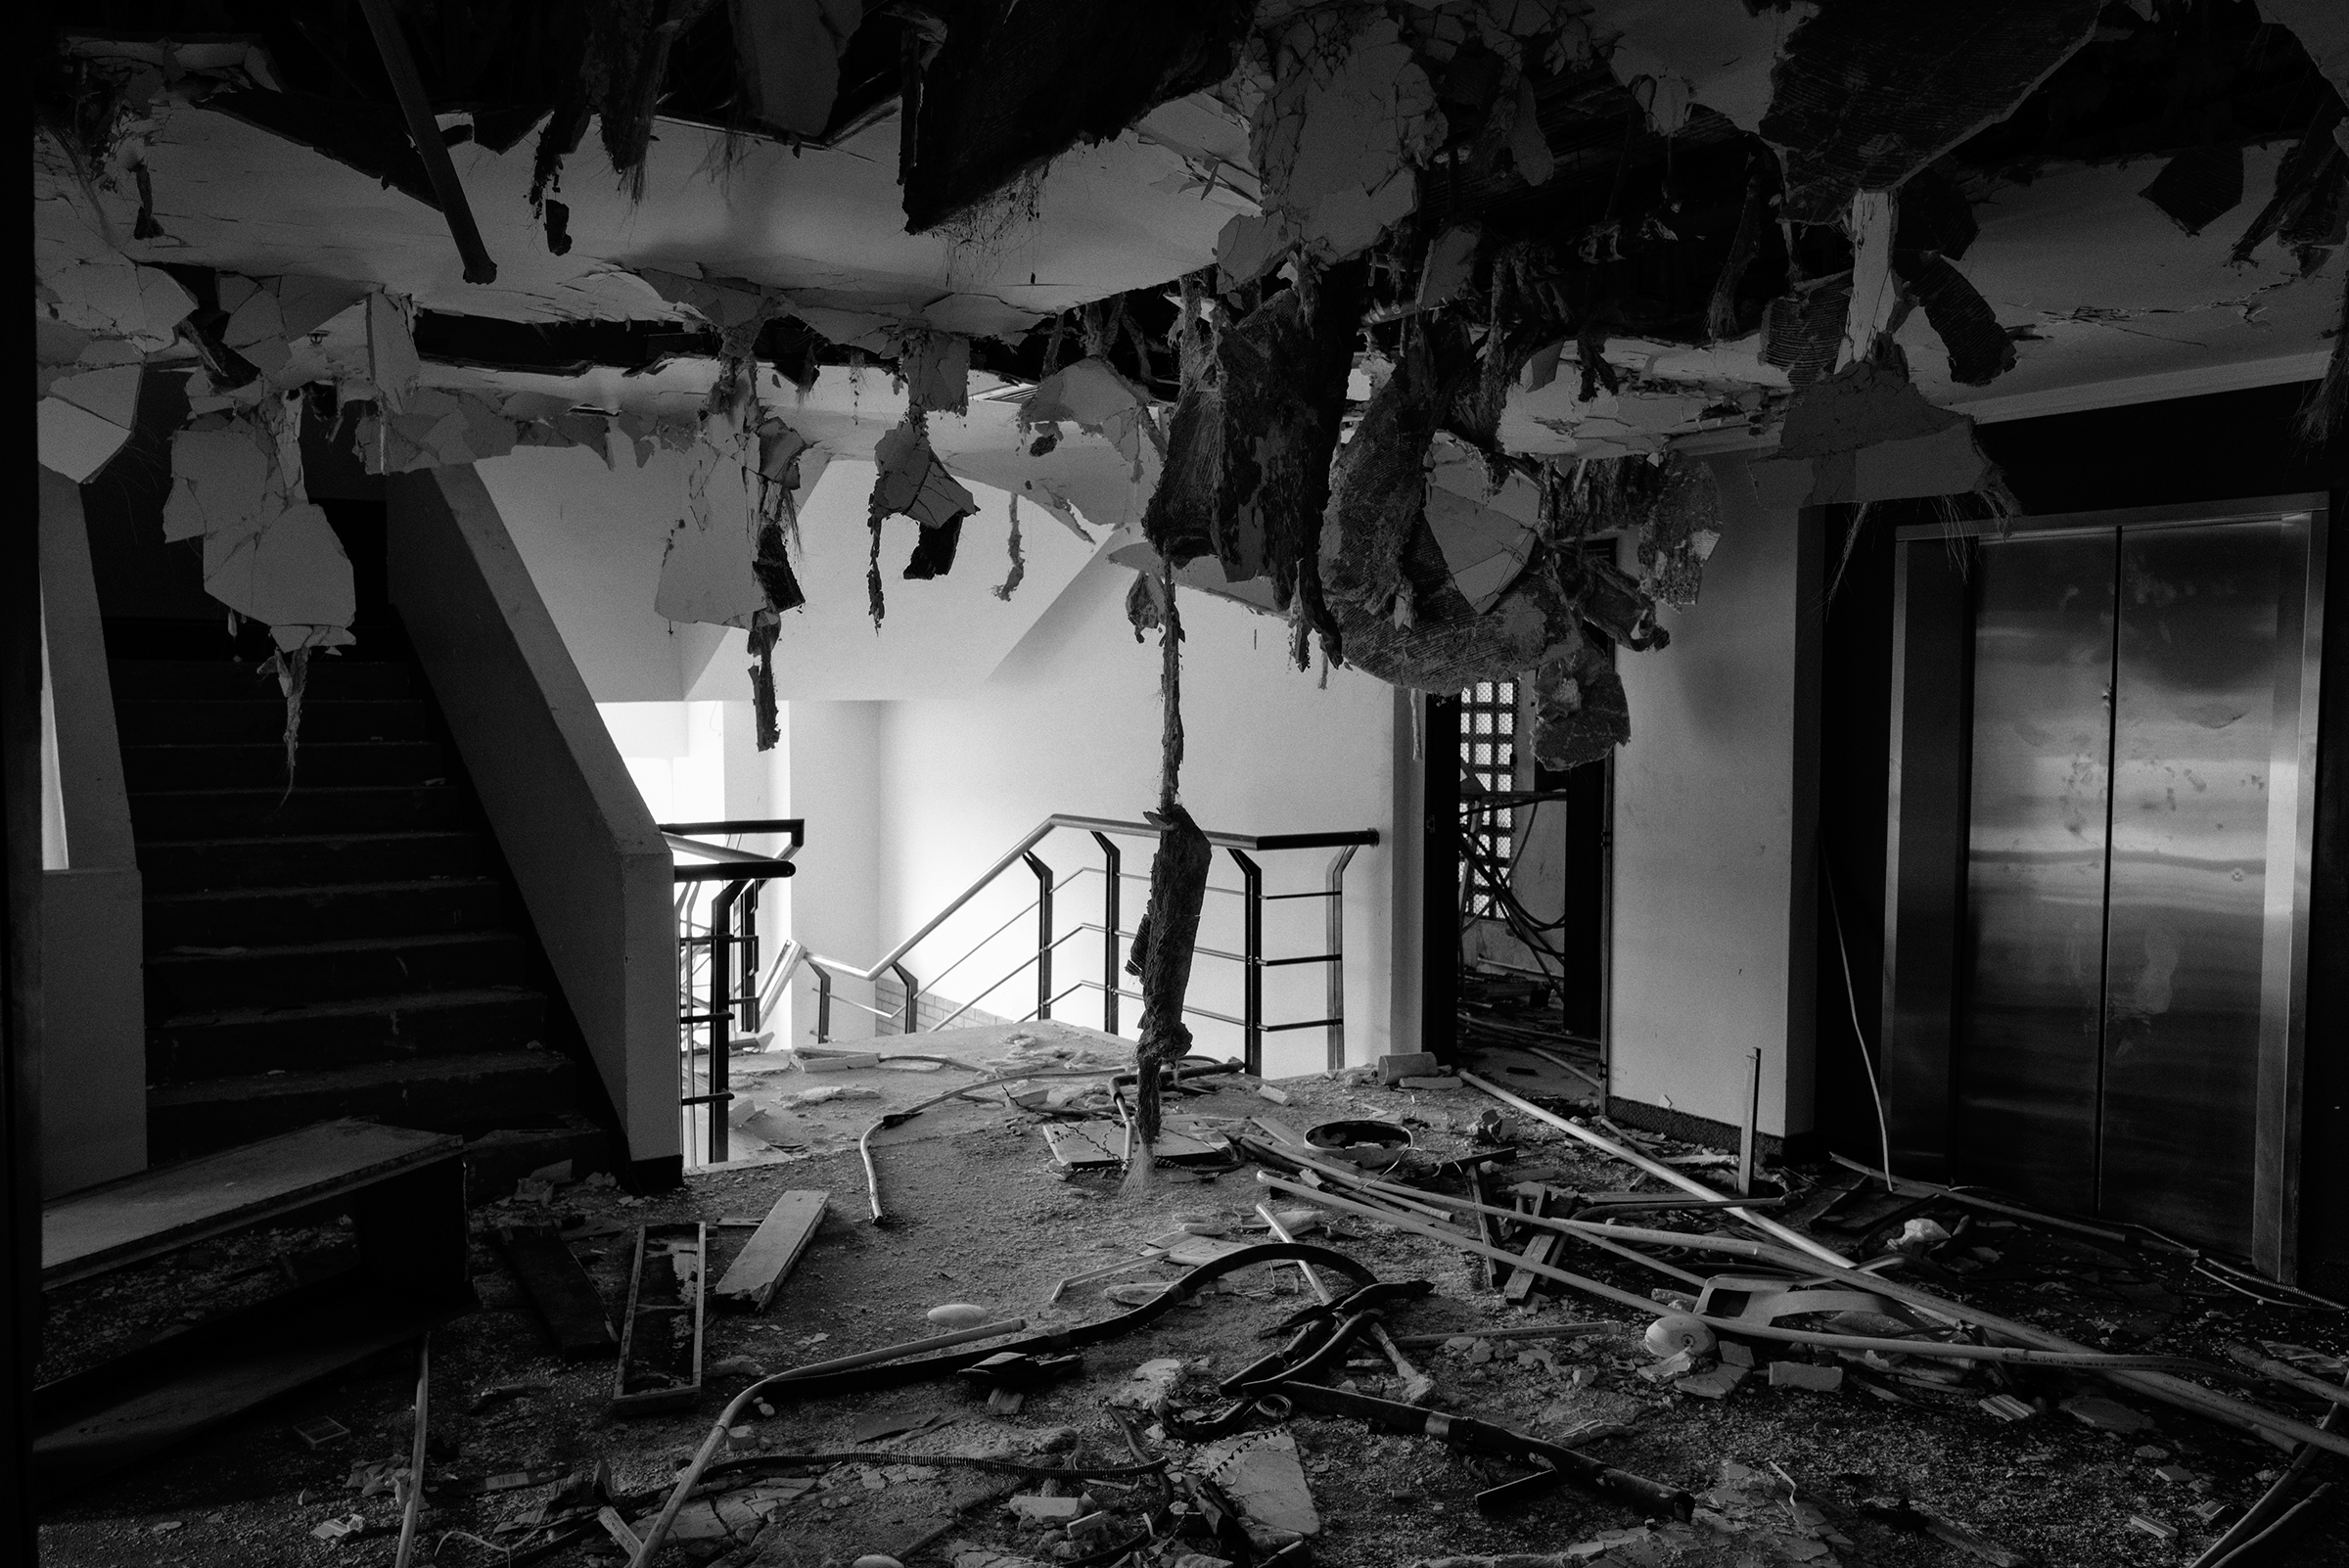 An interior of a hotel after it was looted in Maracaibo in April. The city has experienced widespread looting amid electricity blackouts and shortages. (Alvaro Ybarra Zavala—Getty Images Reportage)